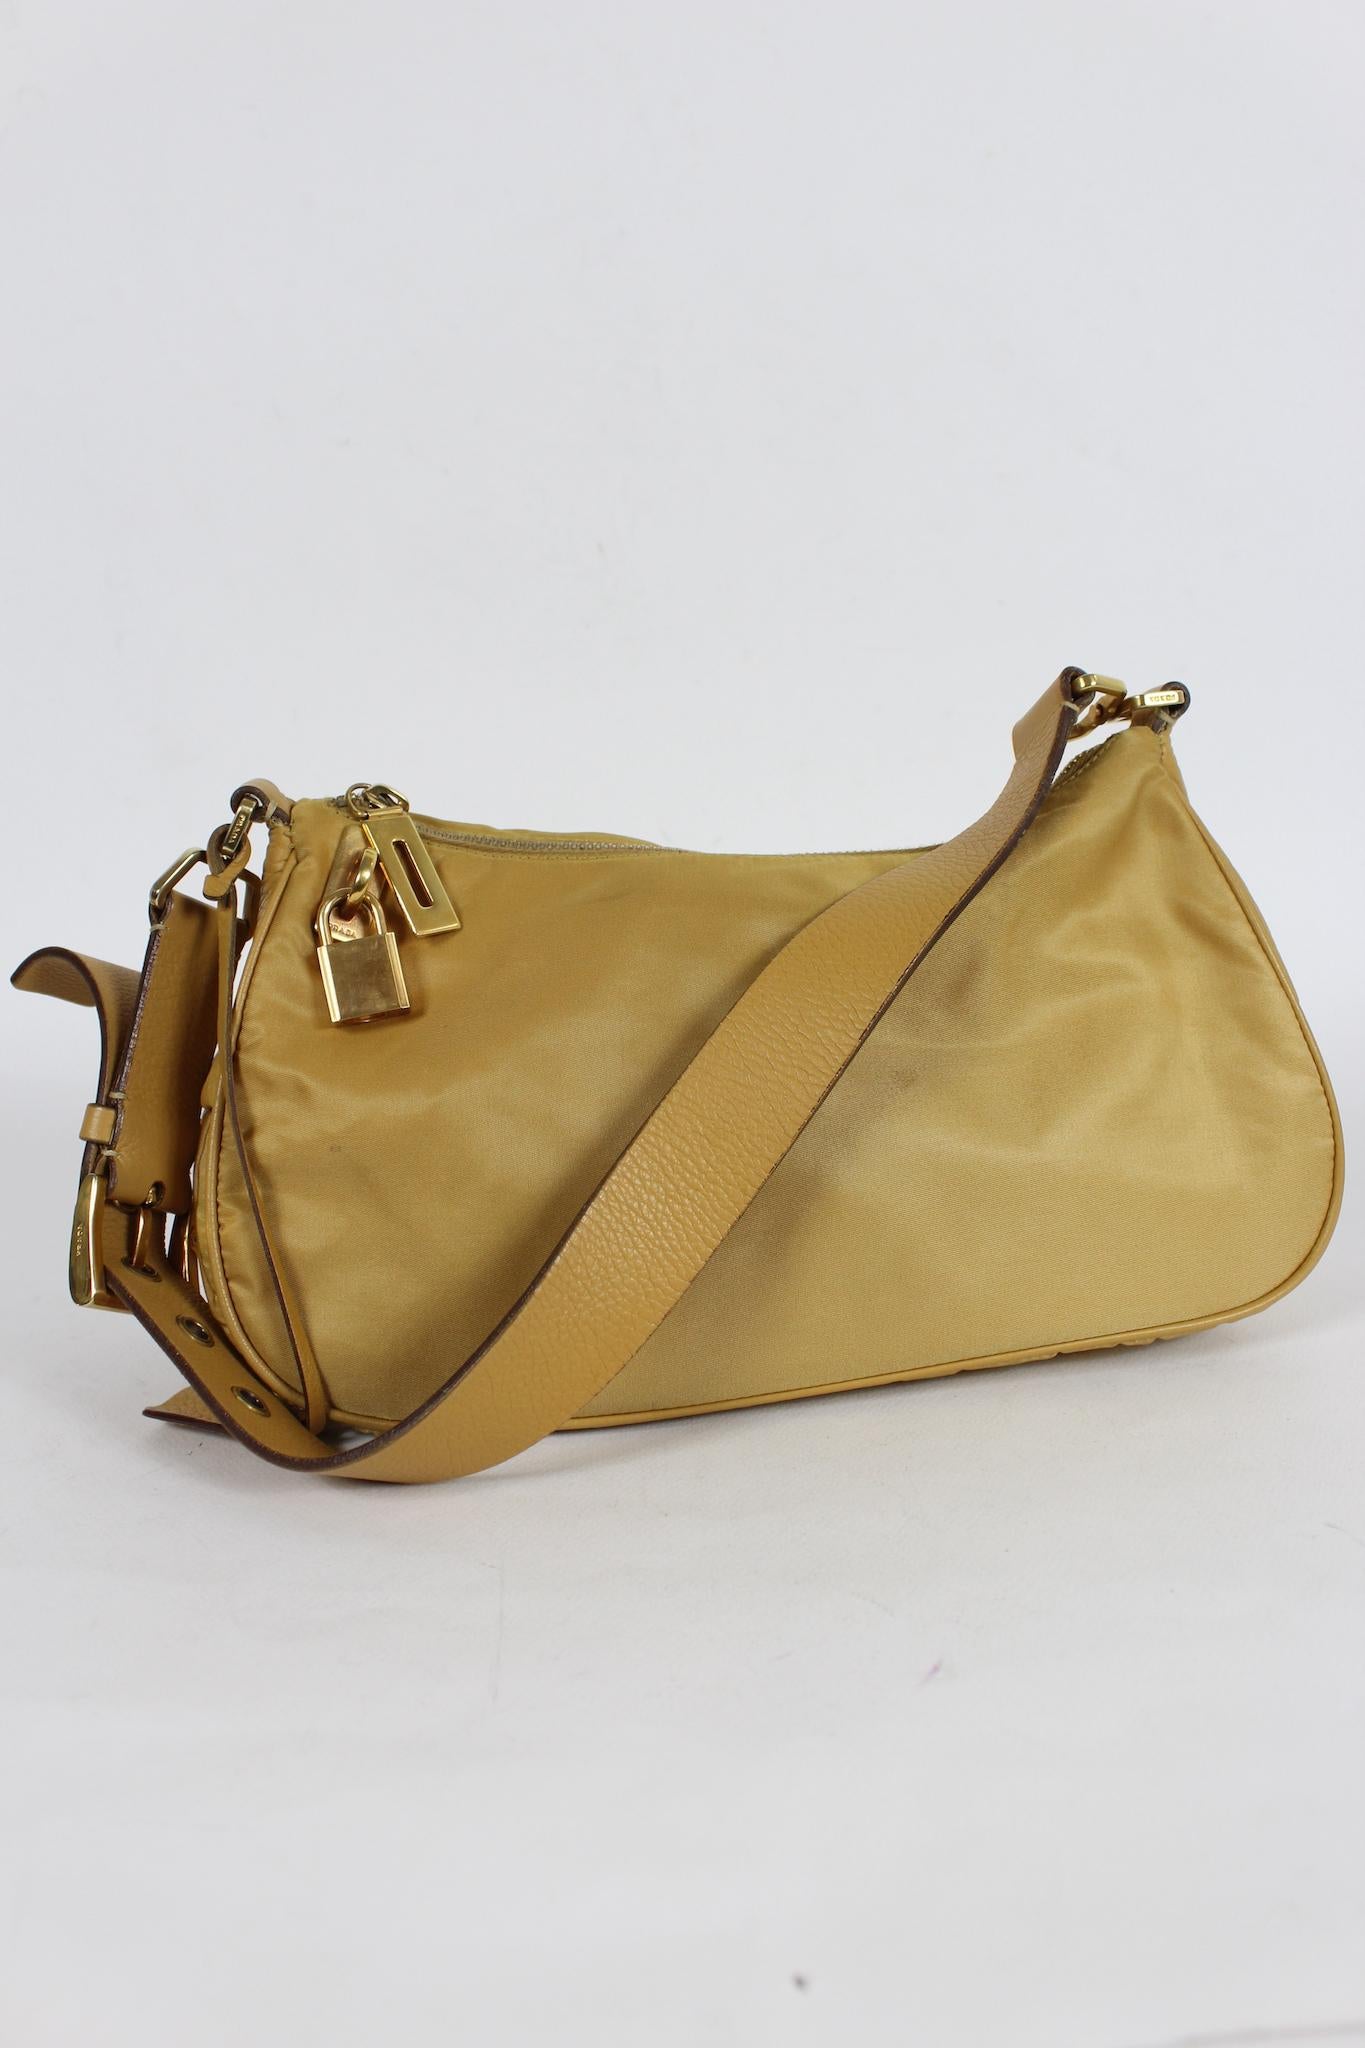 Prada Hobo vintage shoulder bagS 2001s. Honey color with gold-colored details. Zip and padlock closure with key, internal zip pocket. Adjustable shoulder strap. The composition is in nylon and deerskin. The dustbag is present. Made in